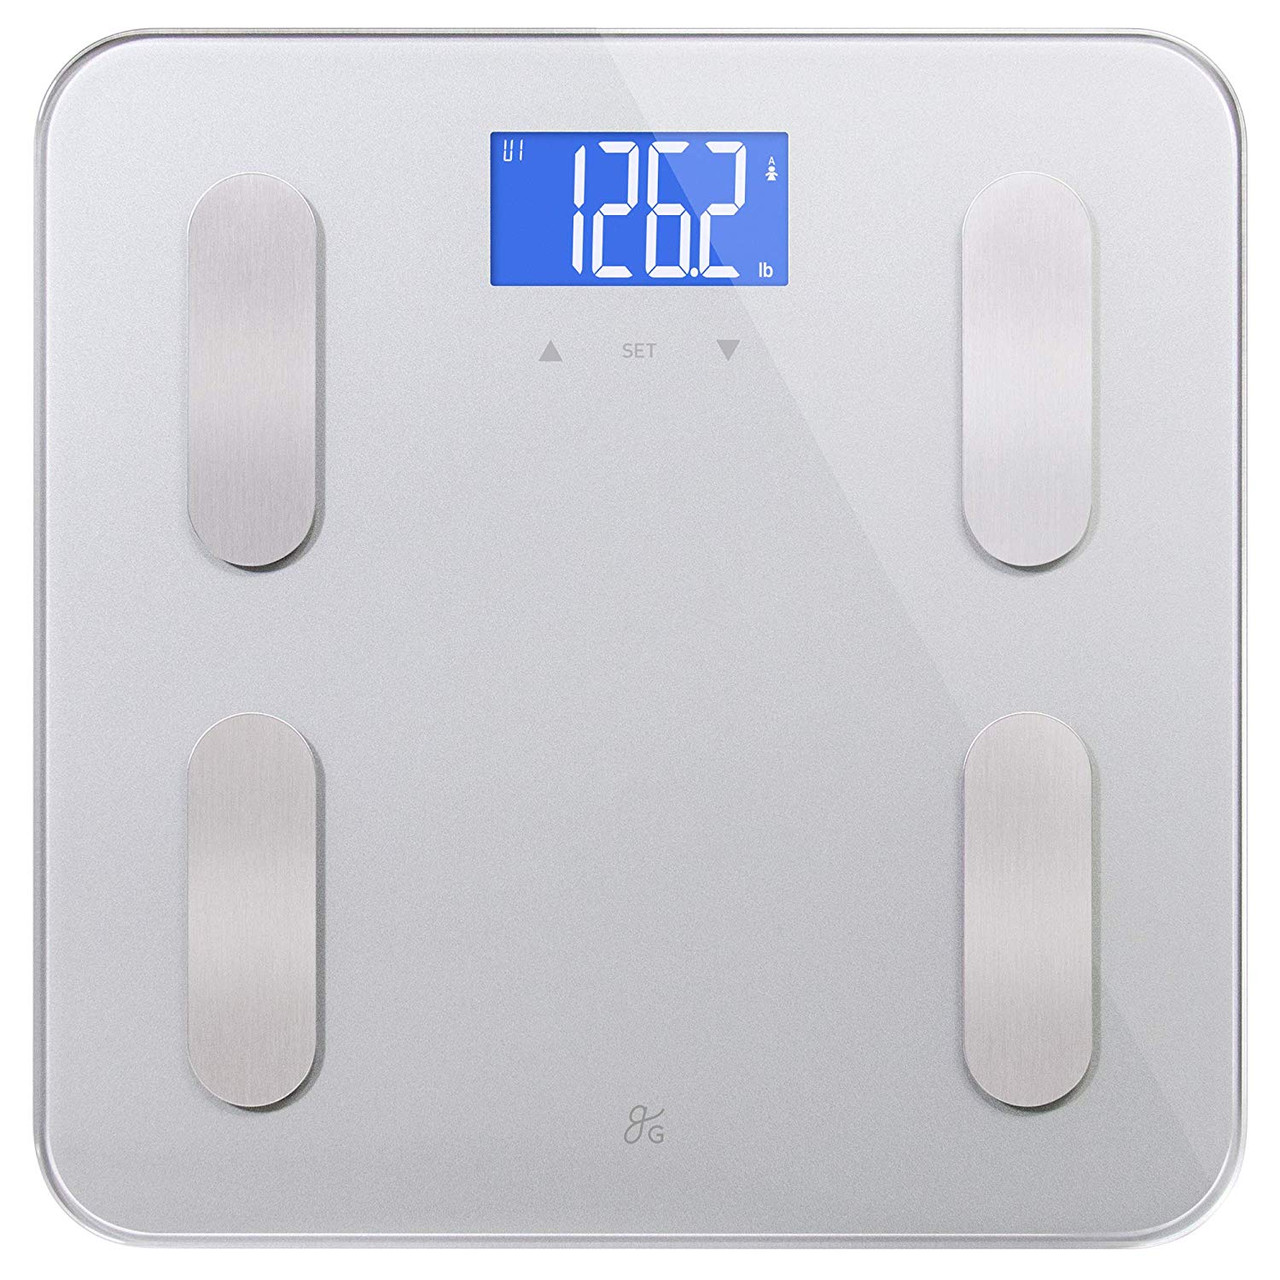 GreaterGoods Smart Scale, Bluetooth Connected Body Weight Bathroom Scale,  BMI, Body Fat, Muscle Mass, Water Weight